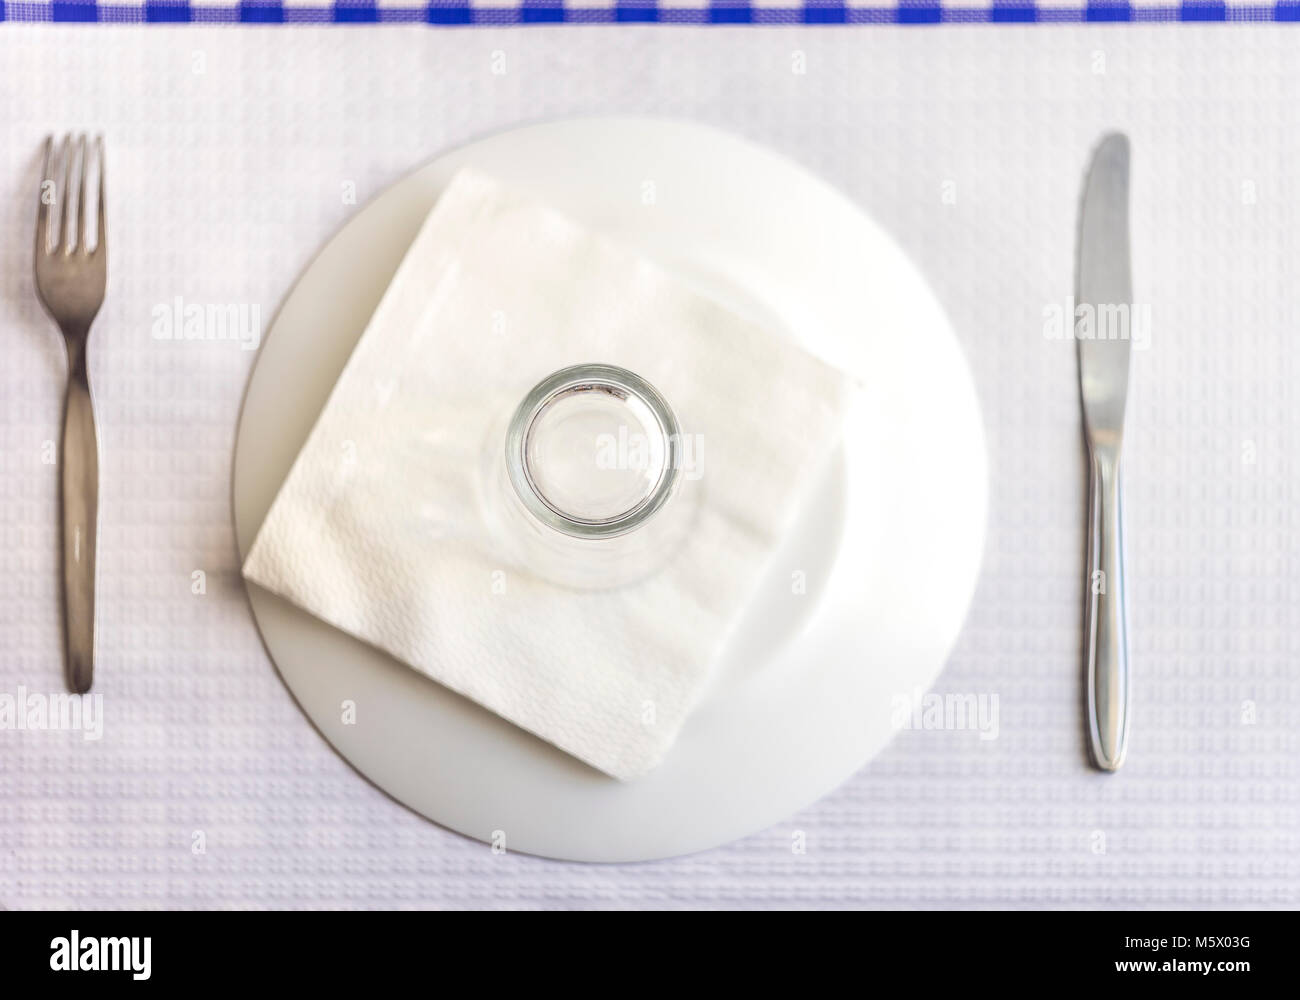 Single tableware - plate, fork, knife, water glass and napkin in the restaurant Stock Photo